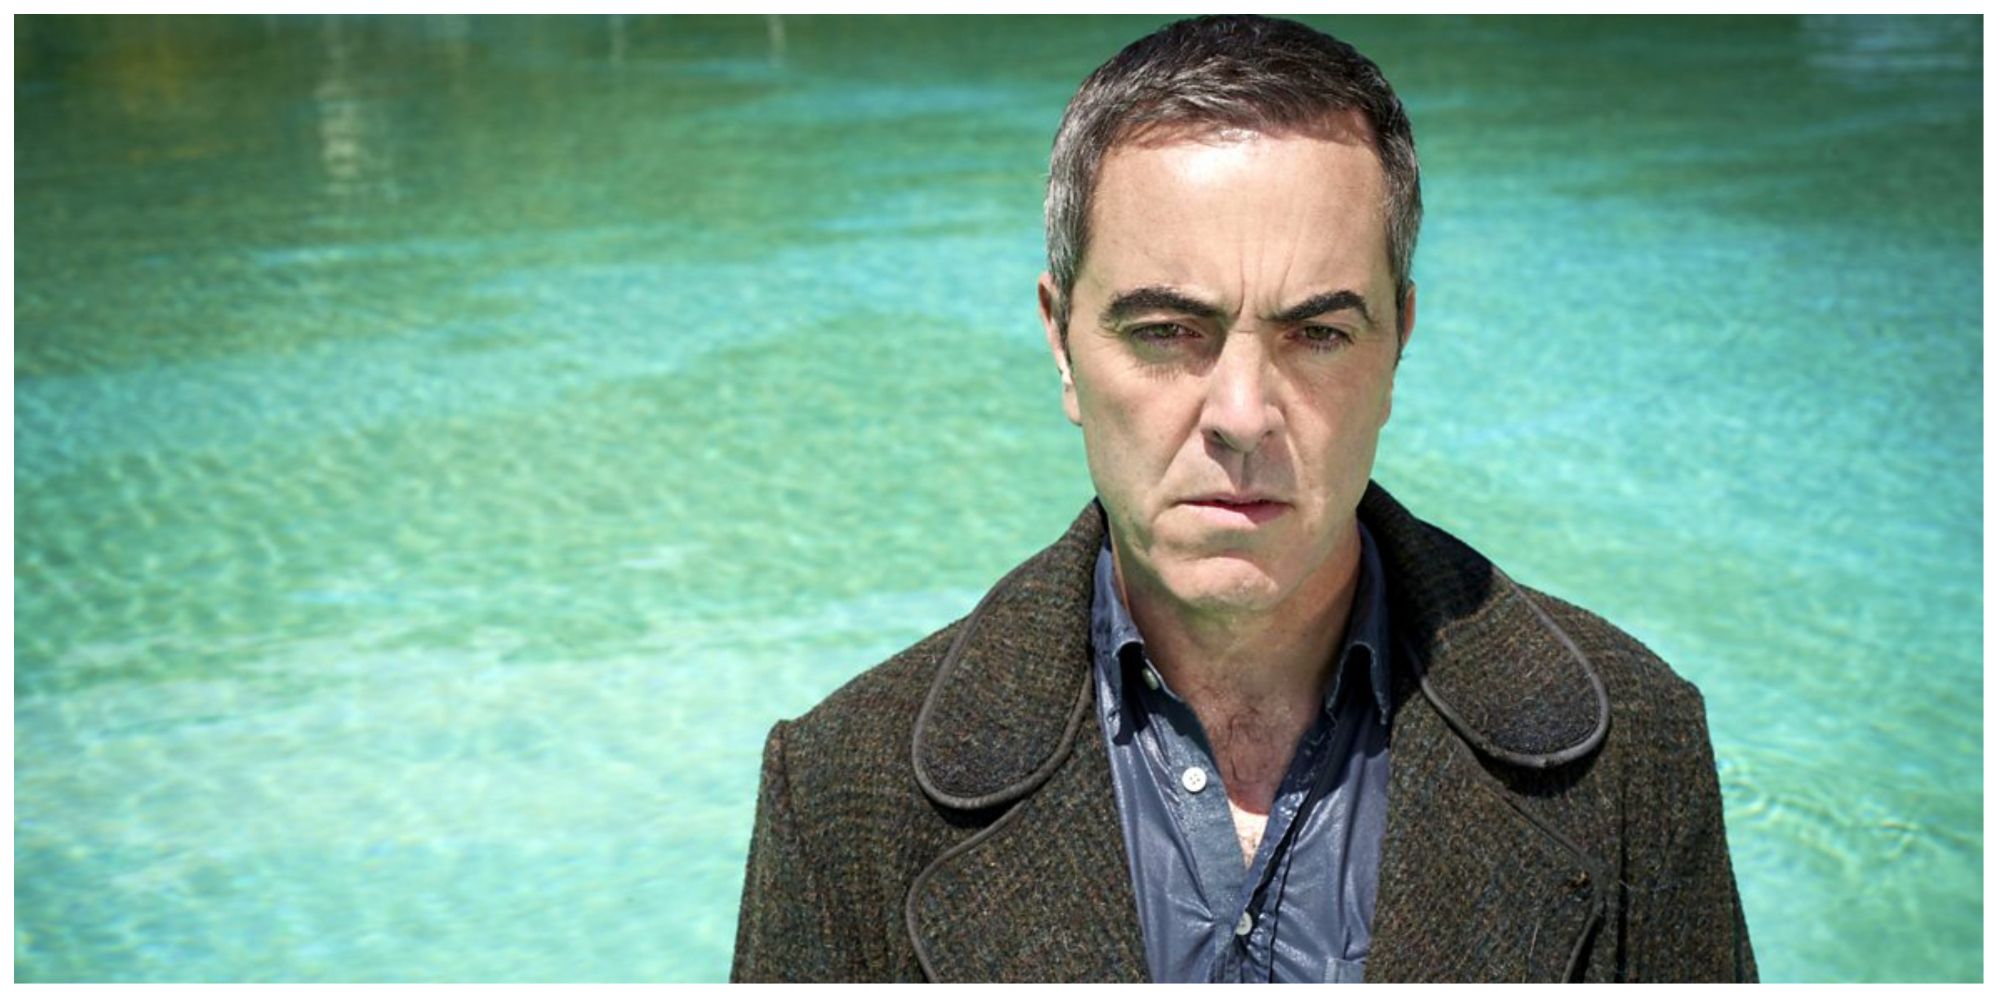 James Nesbitt as Tony in The Missing looking concerned and standing in front of an area of water